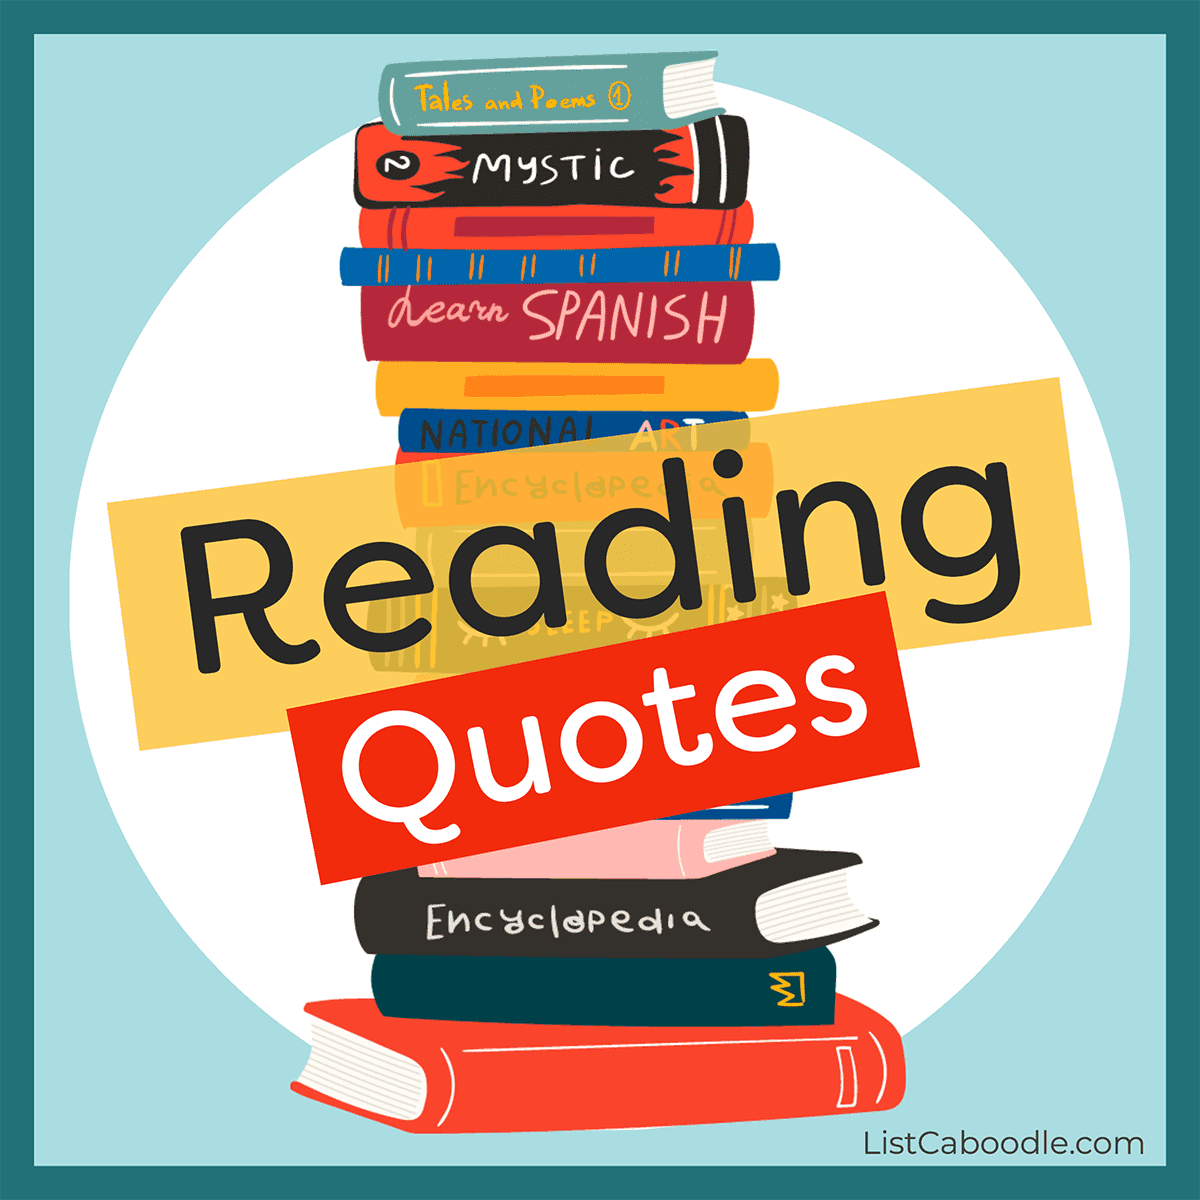 Reading quotes image